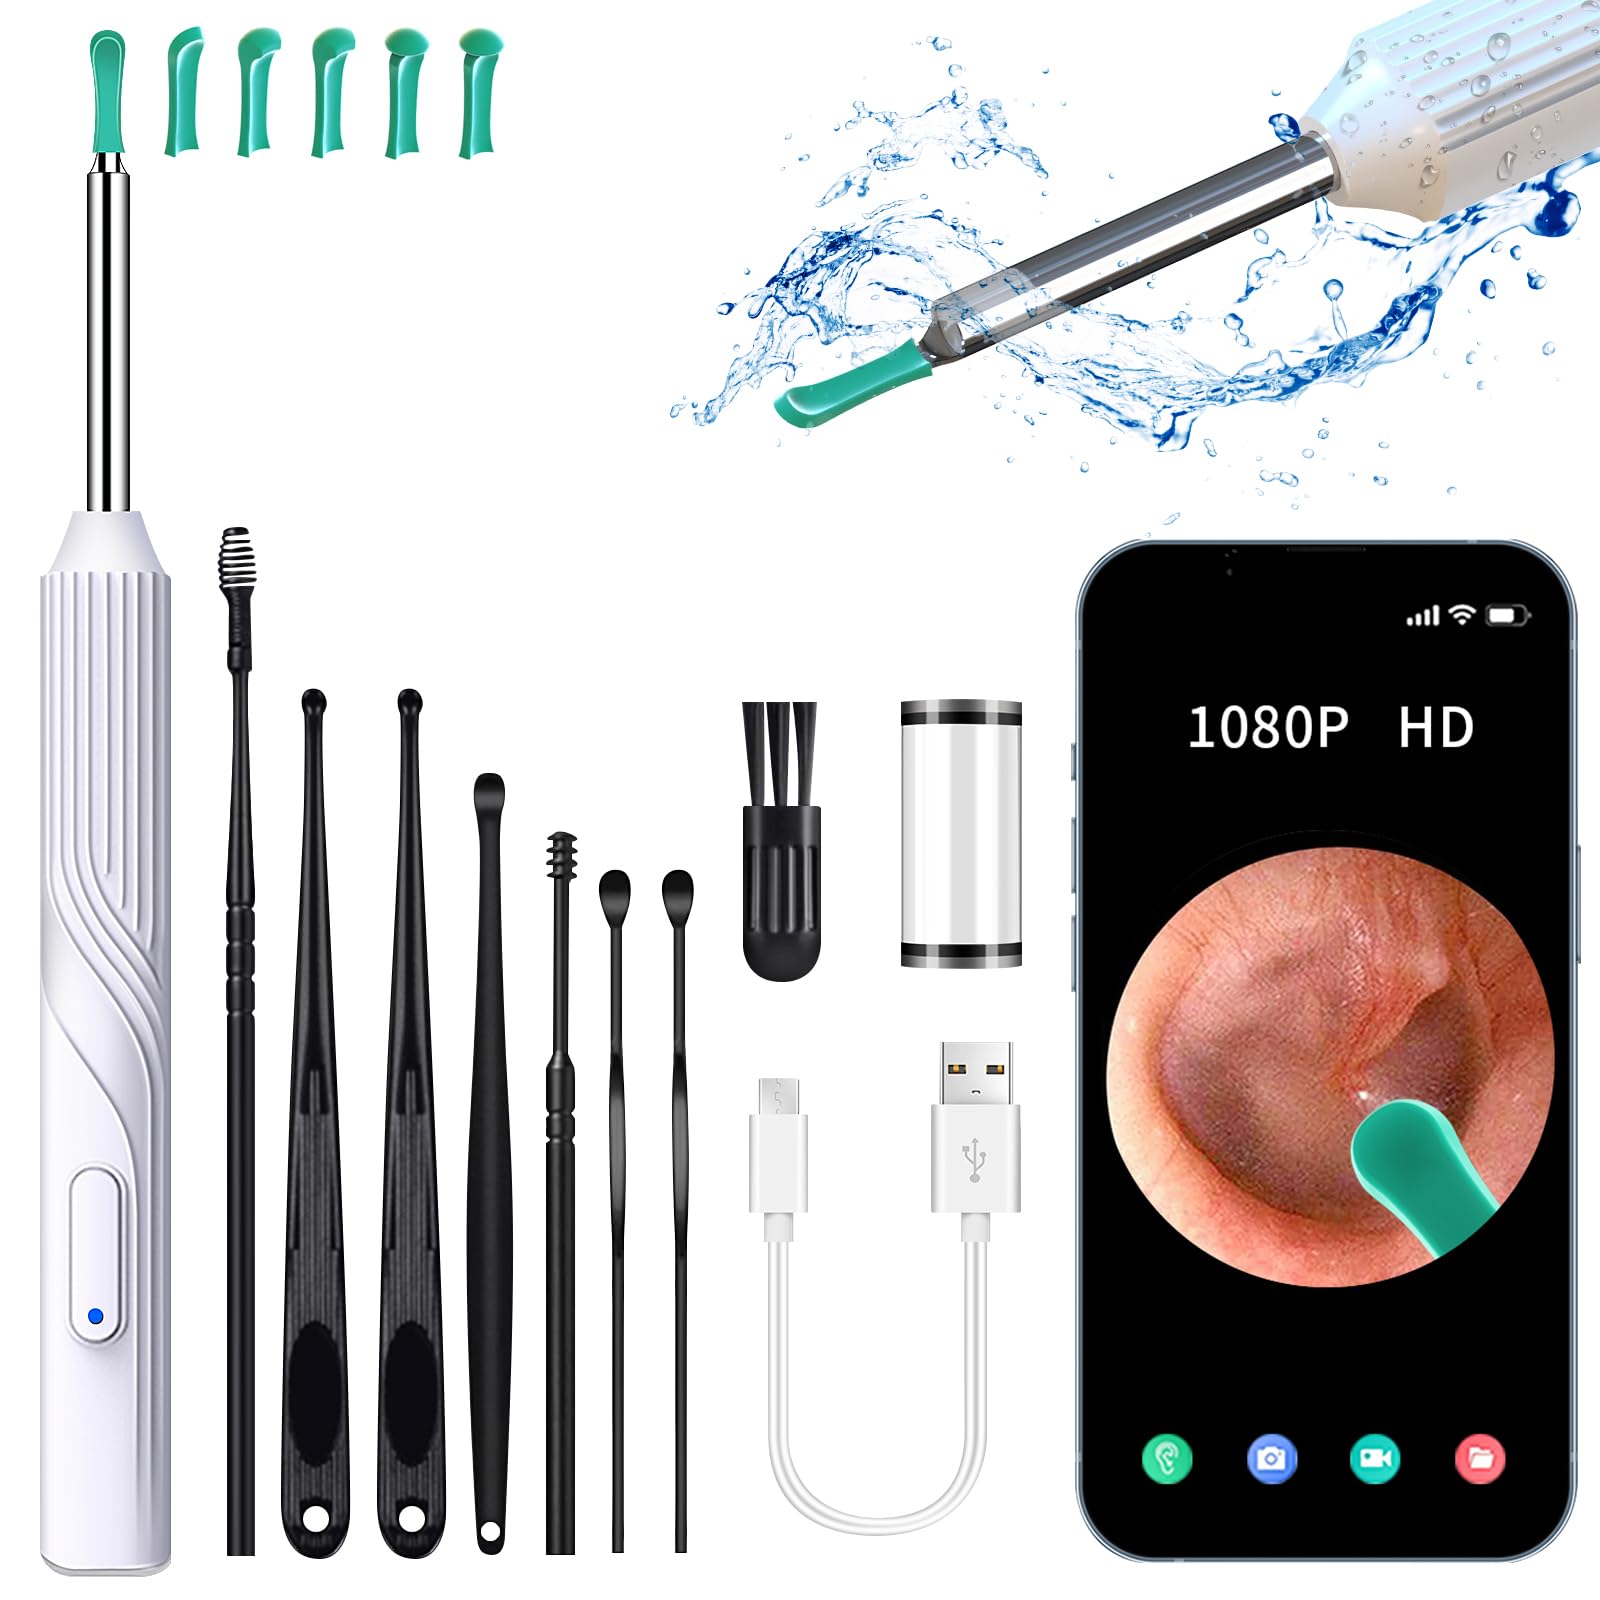 Ear Wax Removal Tool, Ear Cleaner with1080P HD Otoscope Camera, Ear Camera Otoscope with Light, 6 LED Lights, Built-in WiFi,Ear Cleaning Kit for iPhone and Android Phones